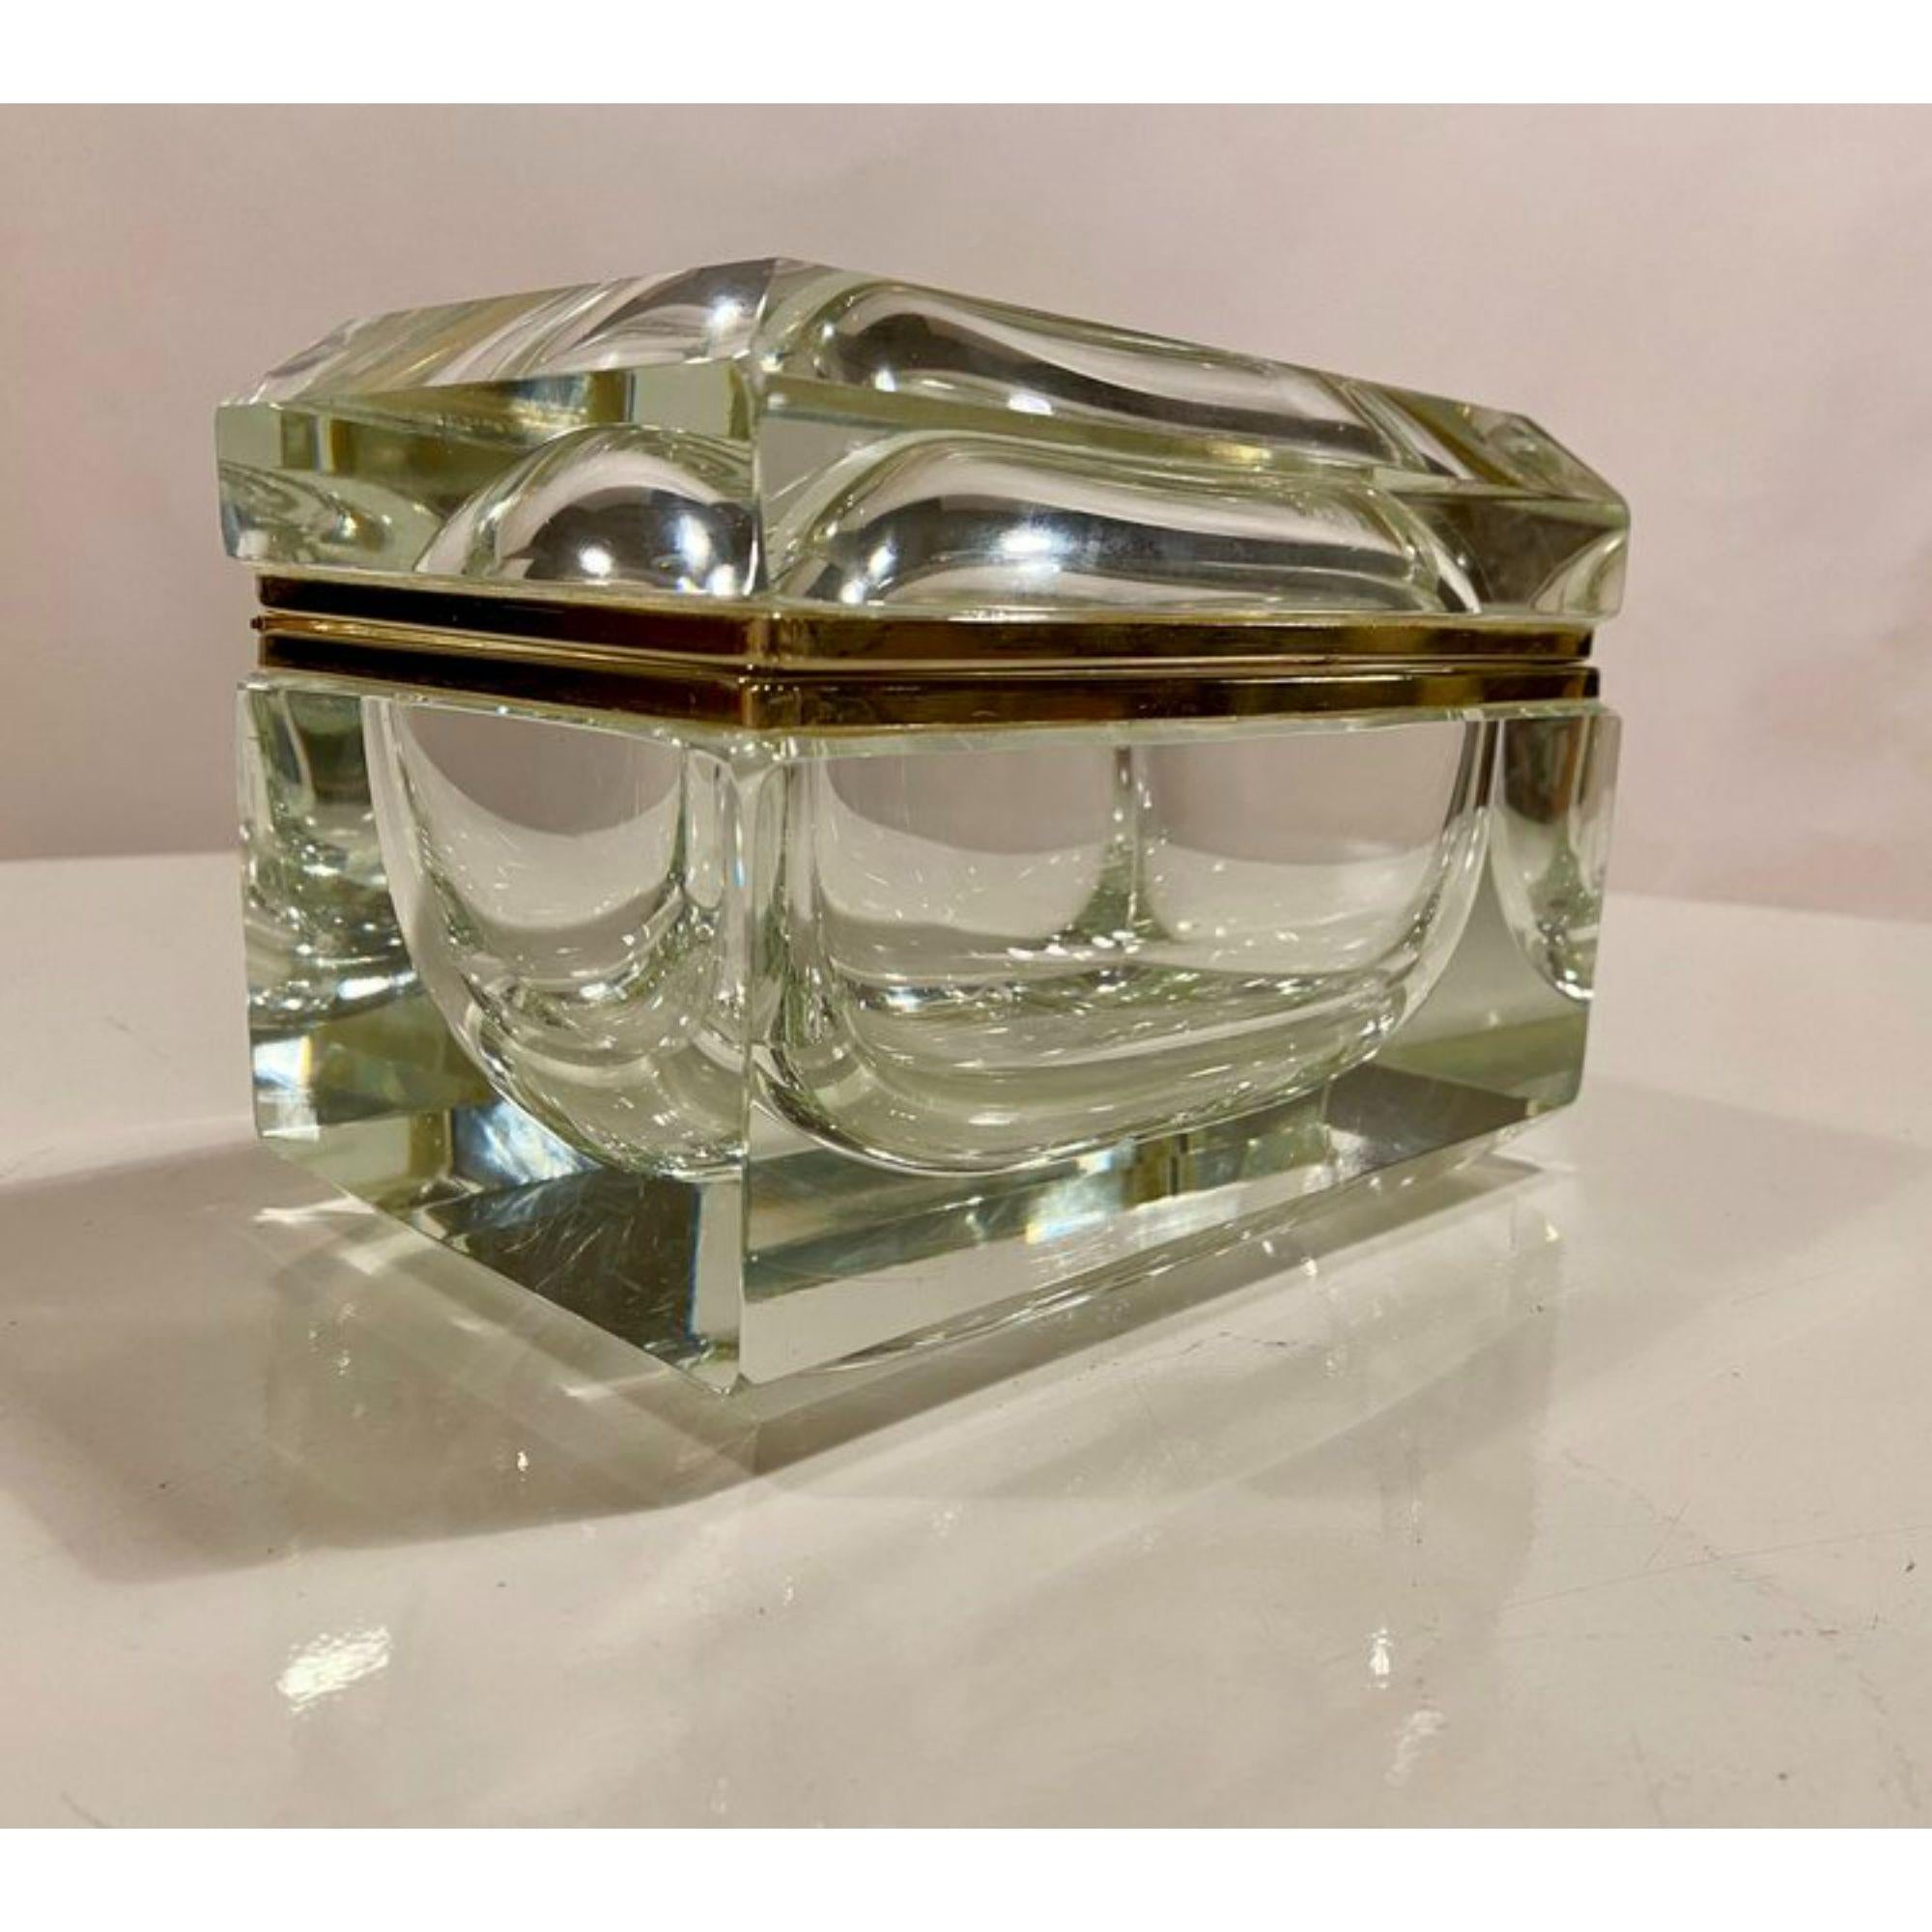 Extra large murano glass lead crystal casket box labelled, 